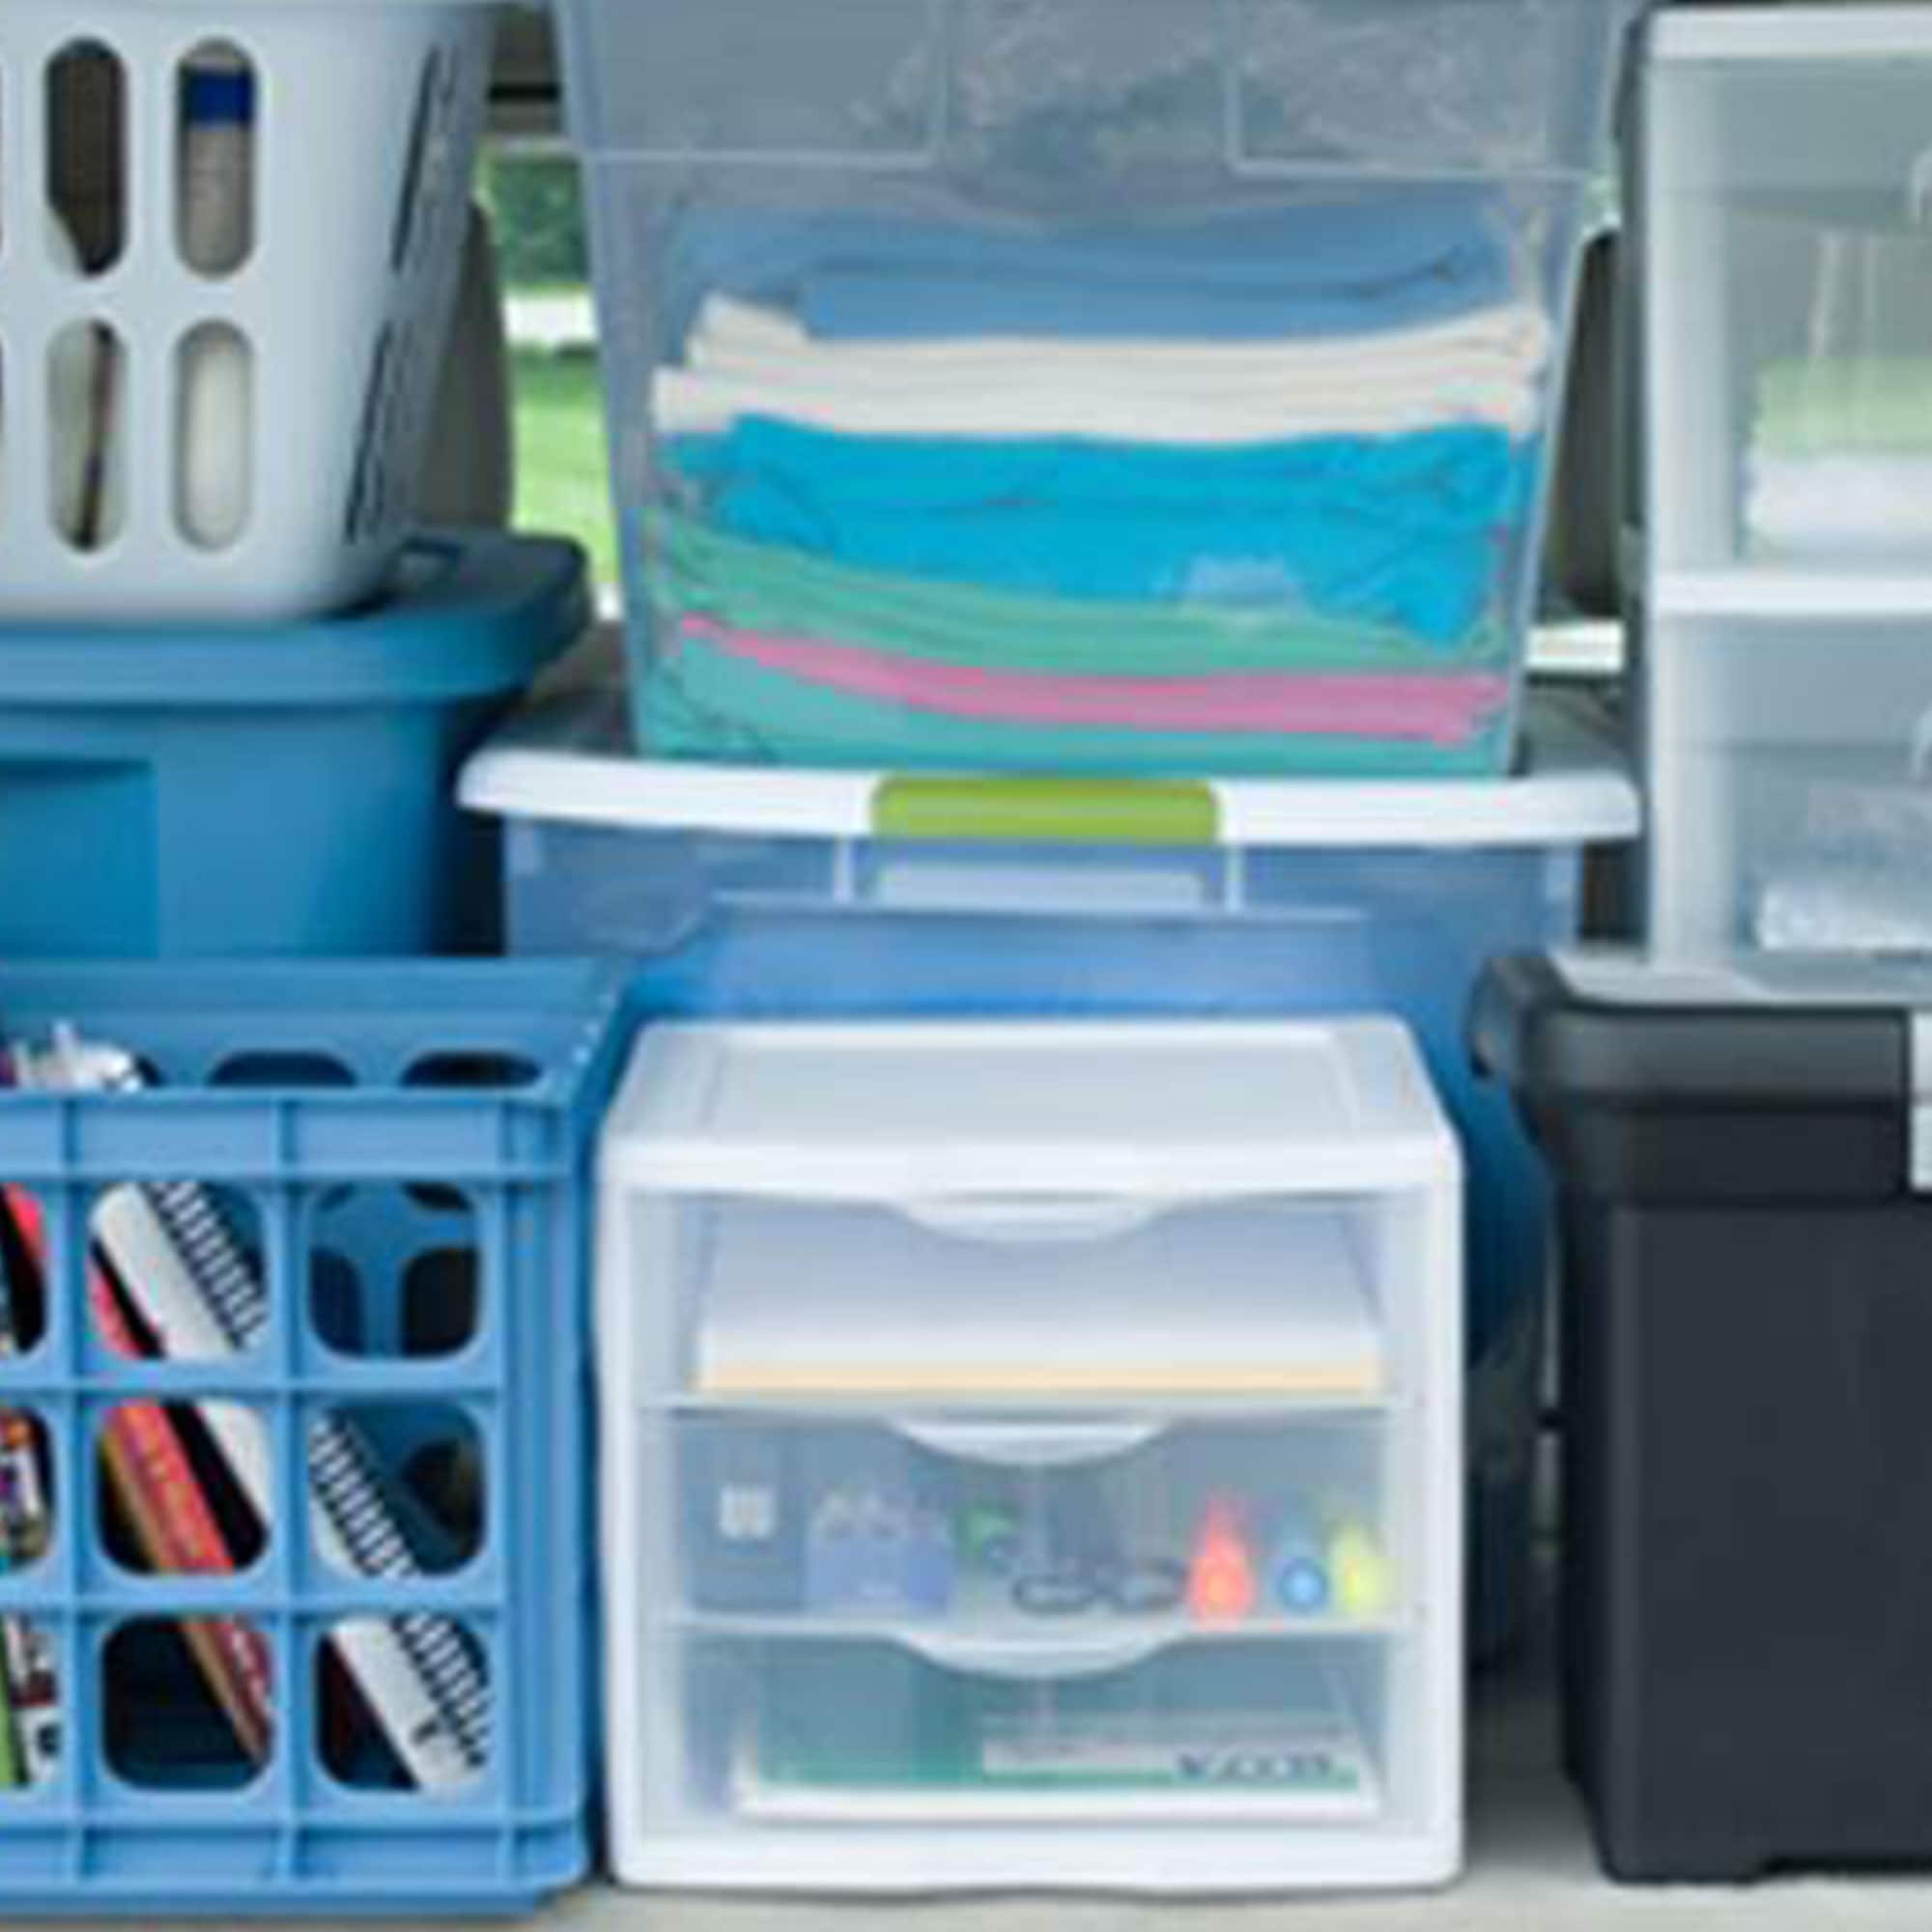 Stackable Storage Drawer Organizer - Green - Blue - 8 Colors